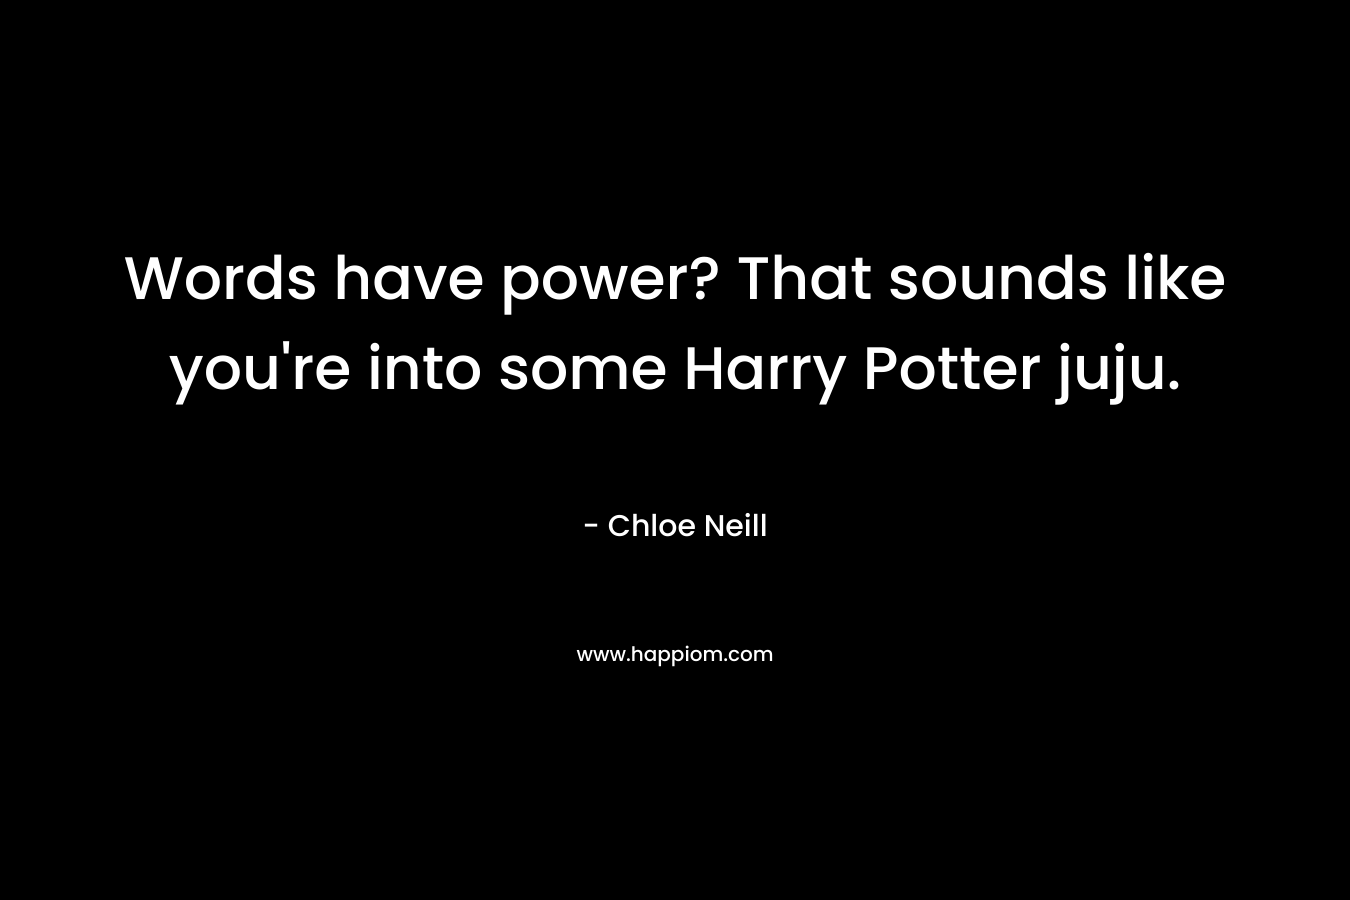 Words have power? That sounds like you’re into some Harry Potter juju. – Chloe Neill